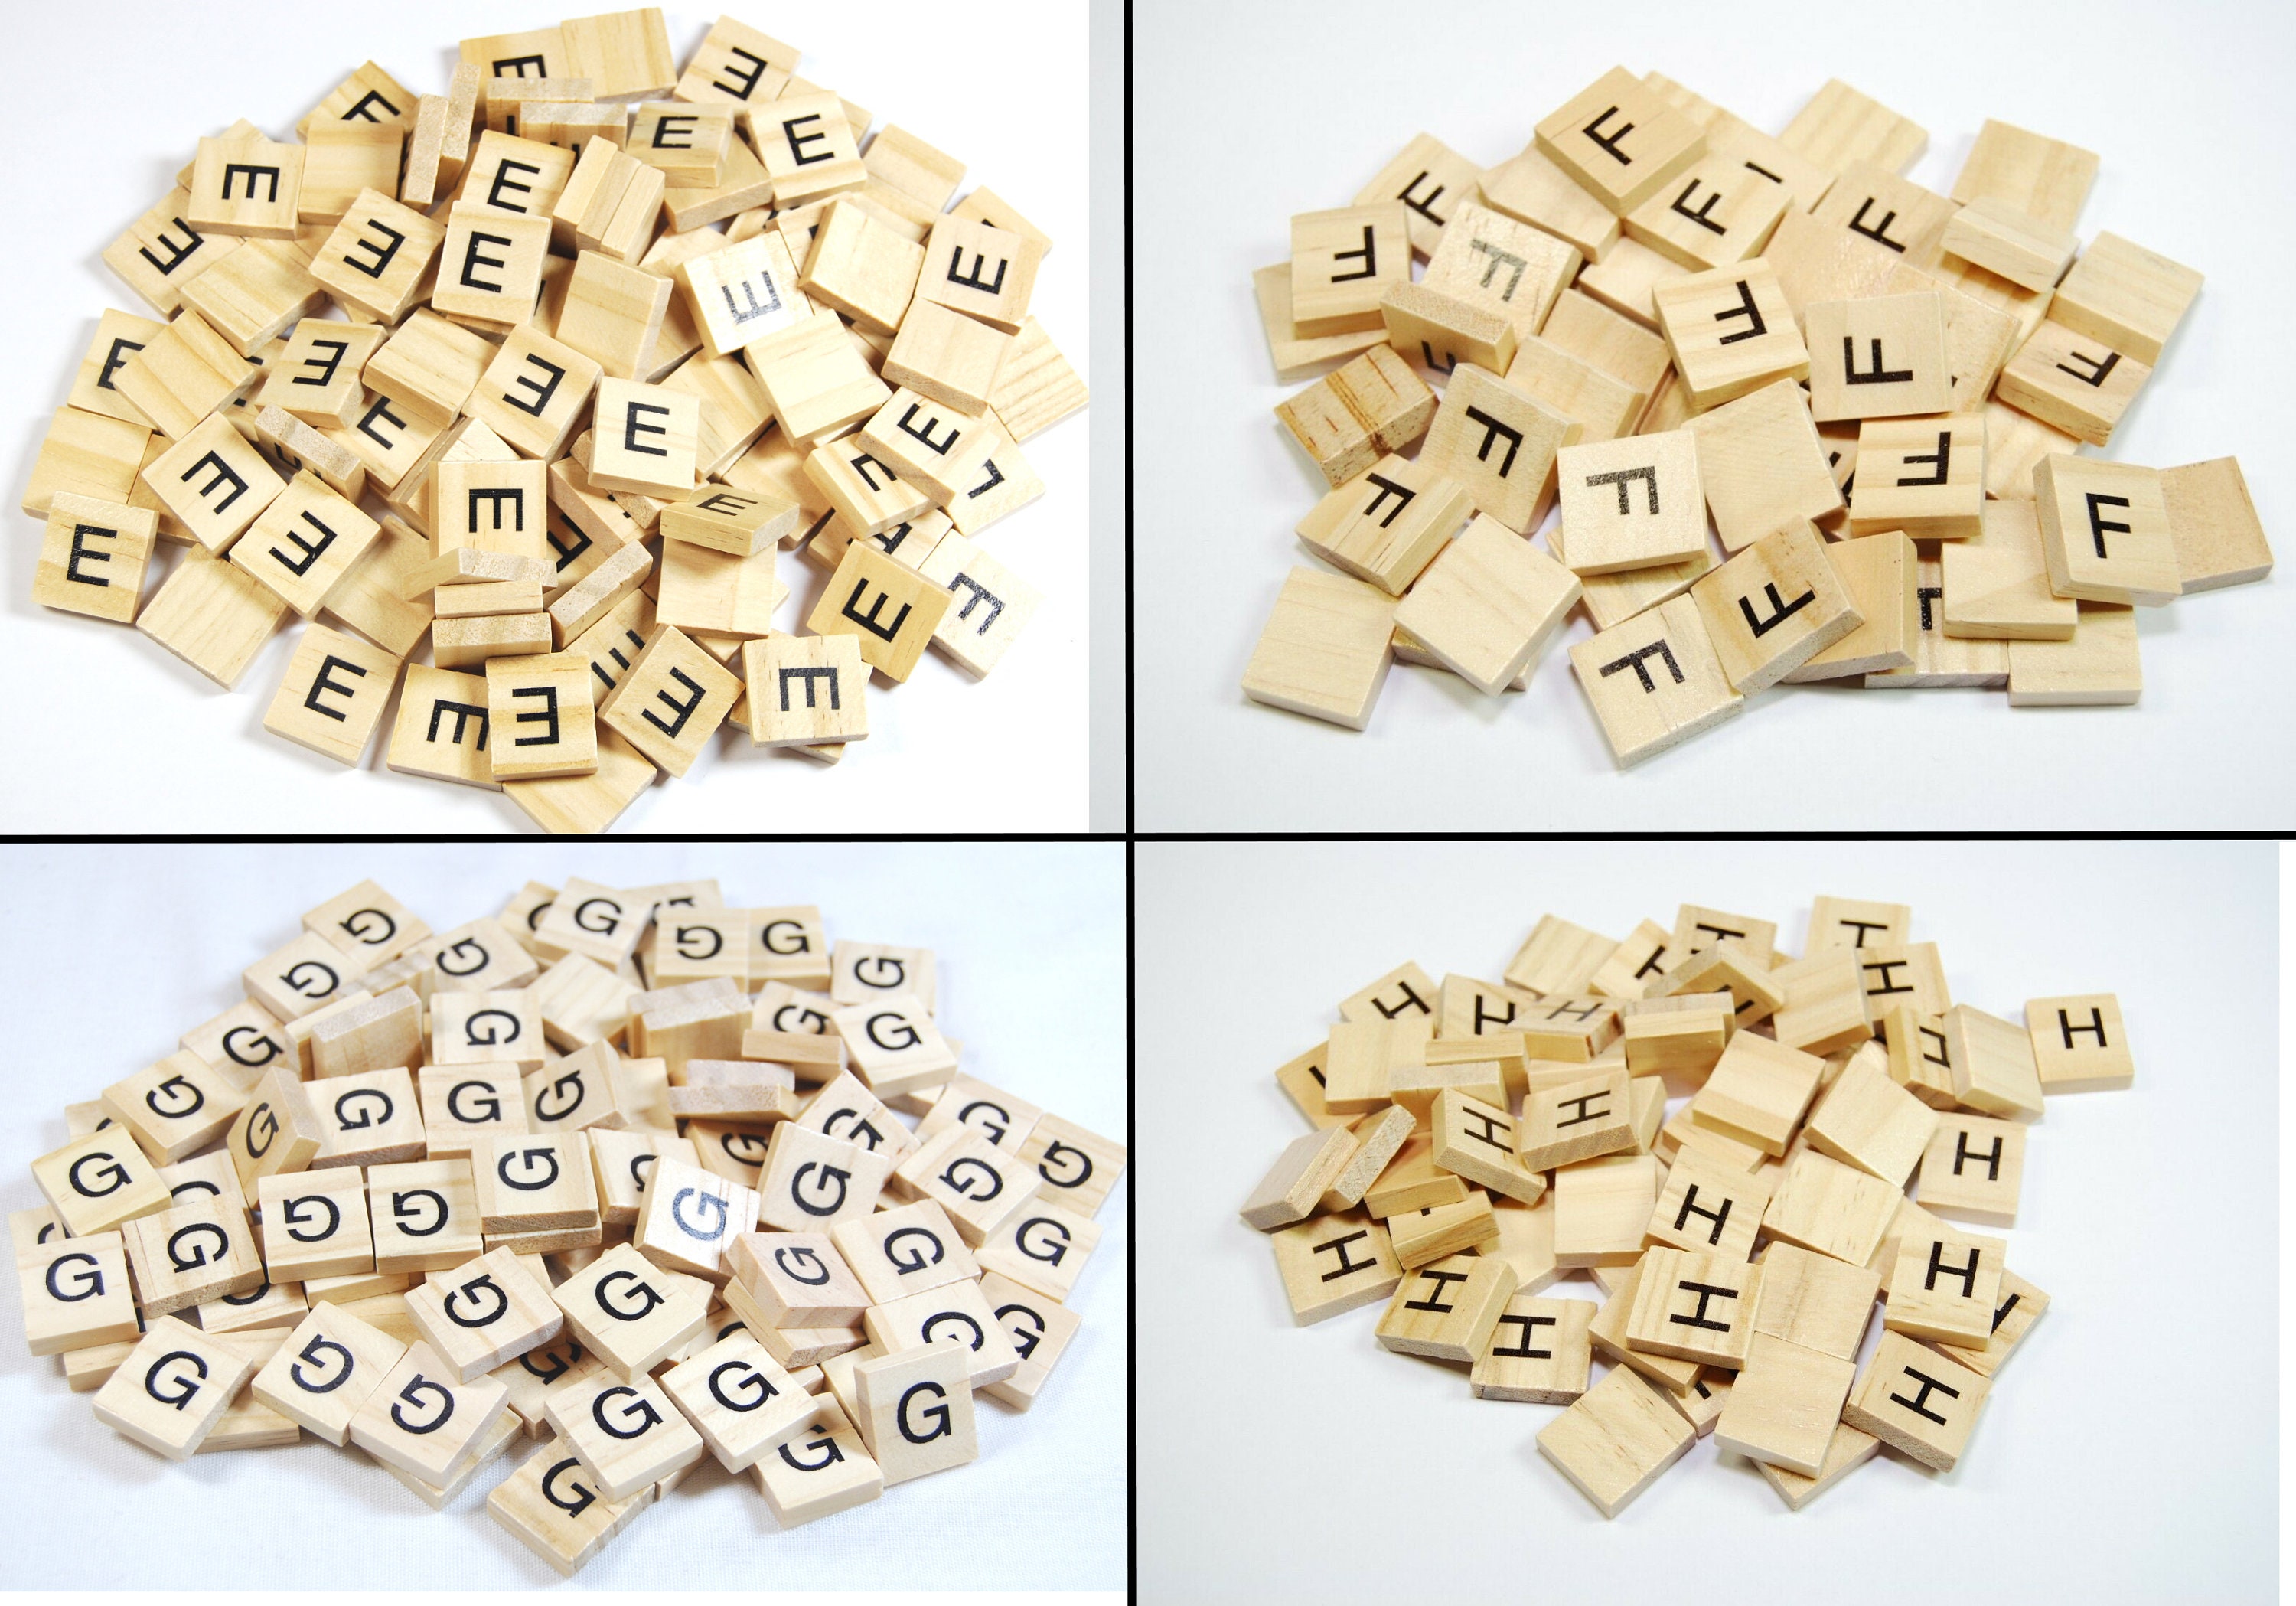 Scrabble Letters for Arts and Crafts 25p for 20mm standard Scrabble Size  50p Each for 50mm Each and 1 Pound for 100mm -  Finland